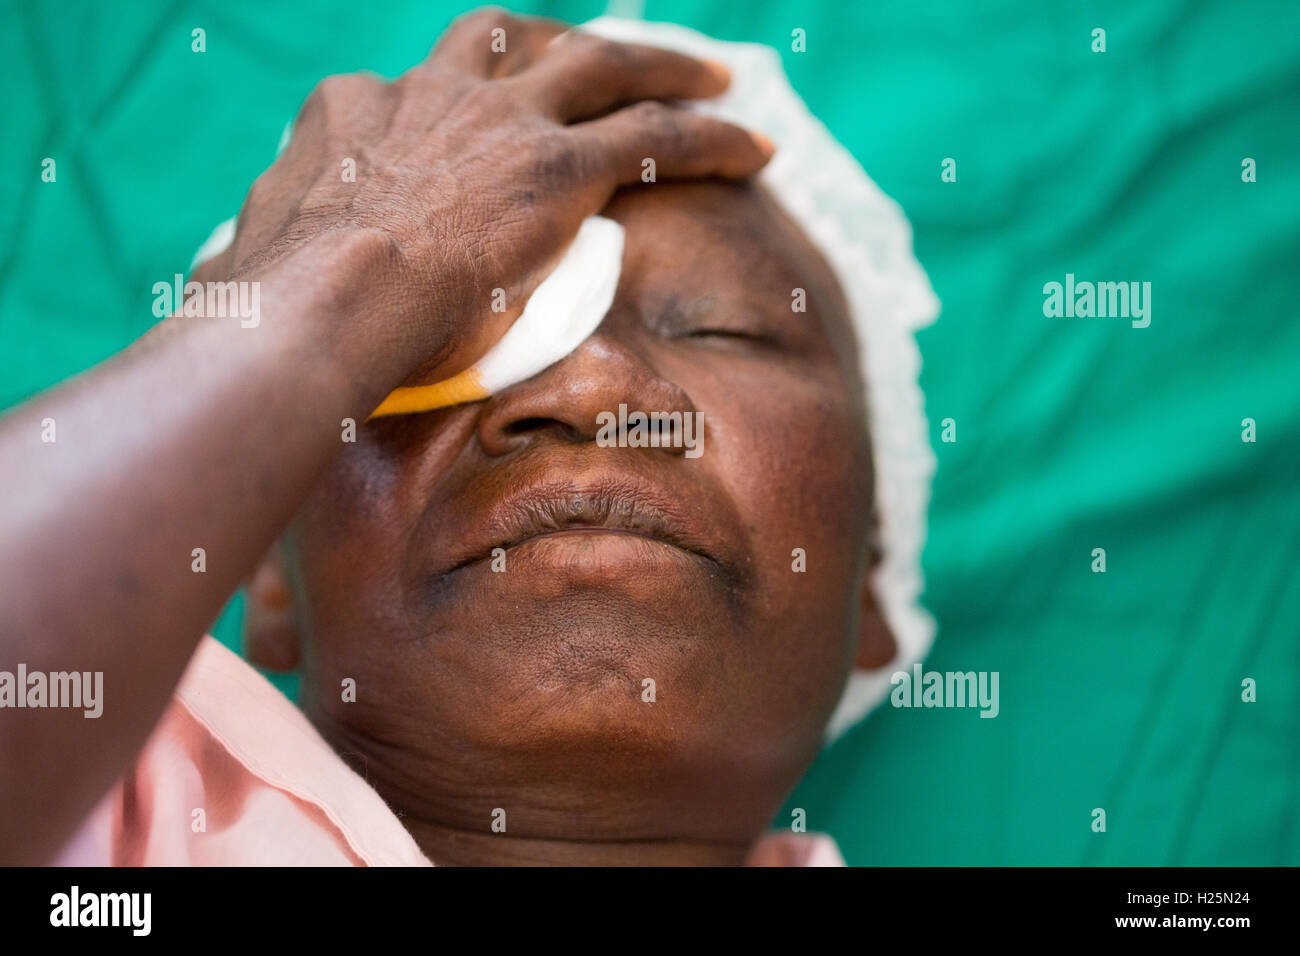 Ribaue Hospital, Ribaue,  Nampula Province, Mozambique, August 2015: Maria Albino  is prepared for her first cataract operation to restore her sight.  Photo by Mike Goldwater Stock Photo